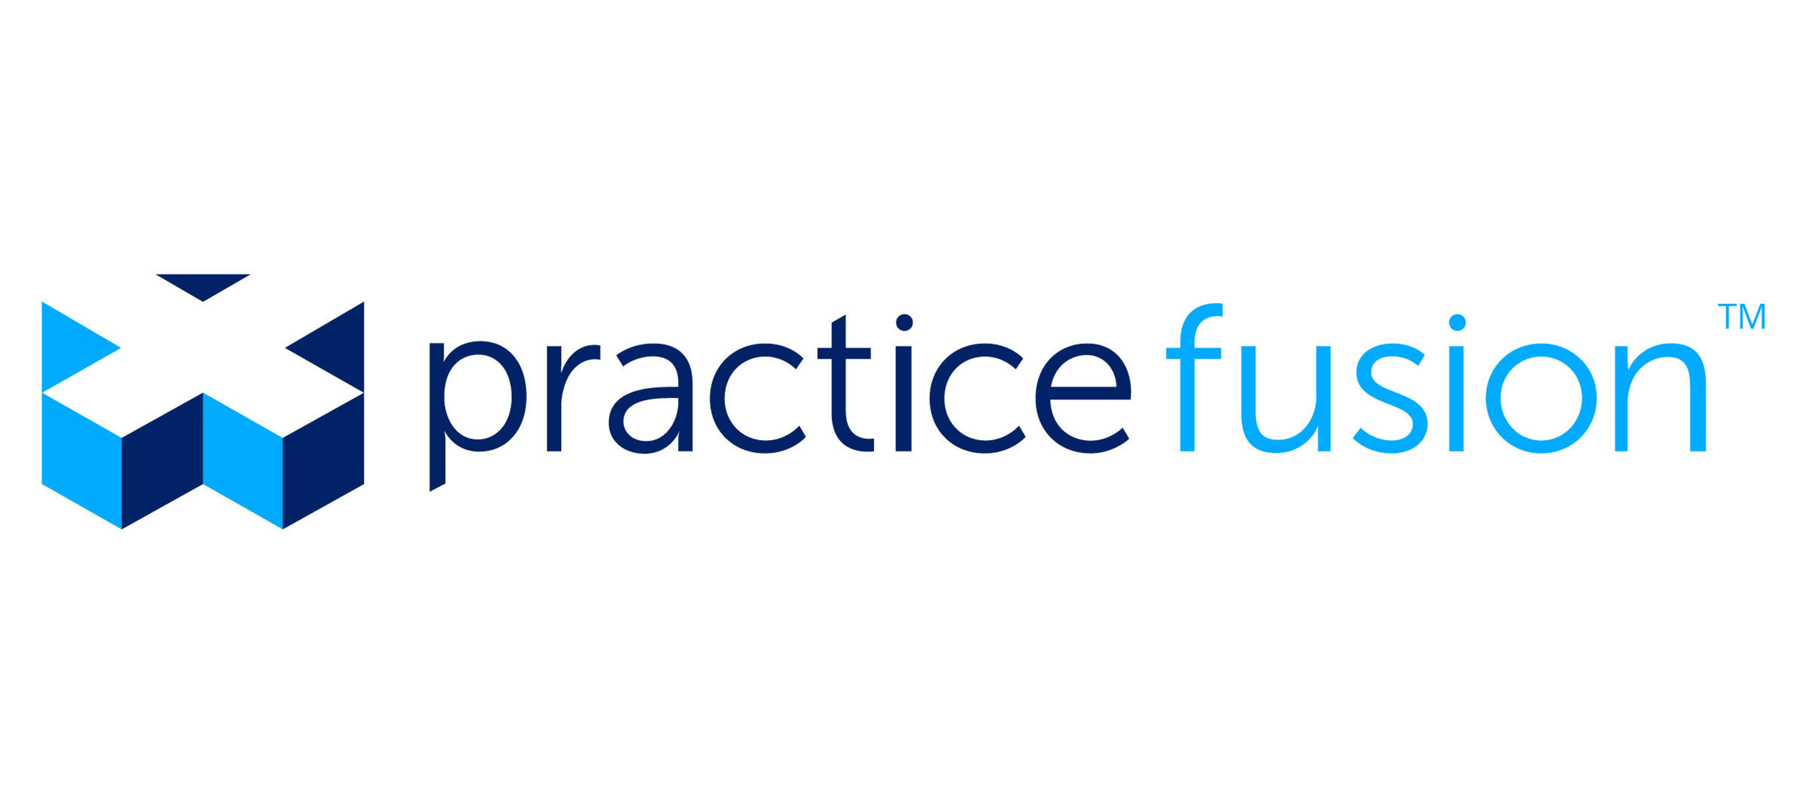 EHR Electronic Health Records From Practice Fusion Logo